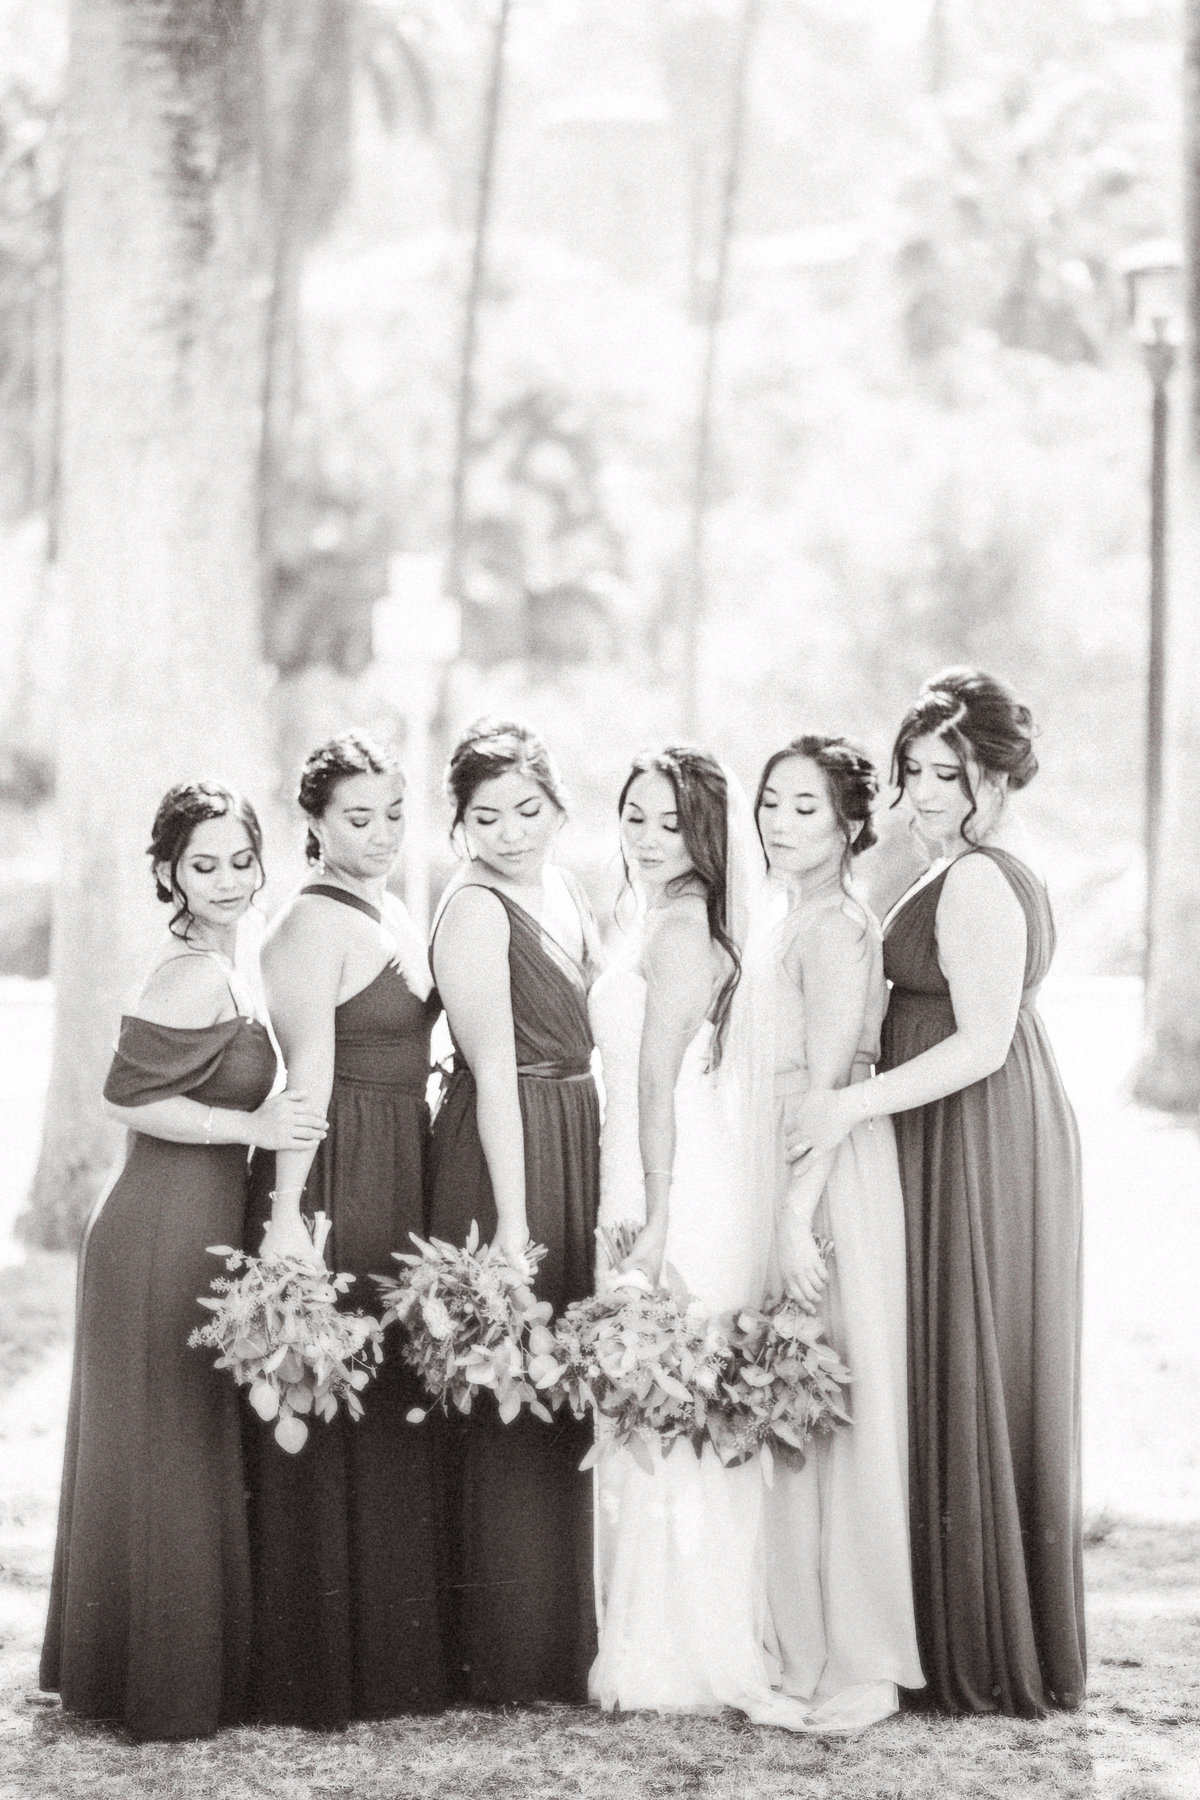 Wedding Photograph Of Bride And Bridesmaid Black And White Los Angeles